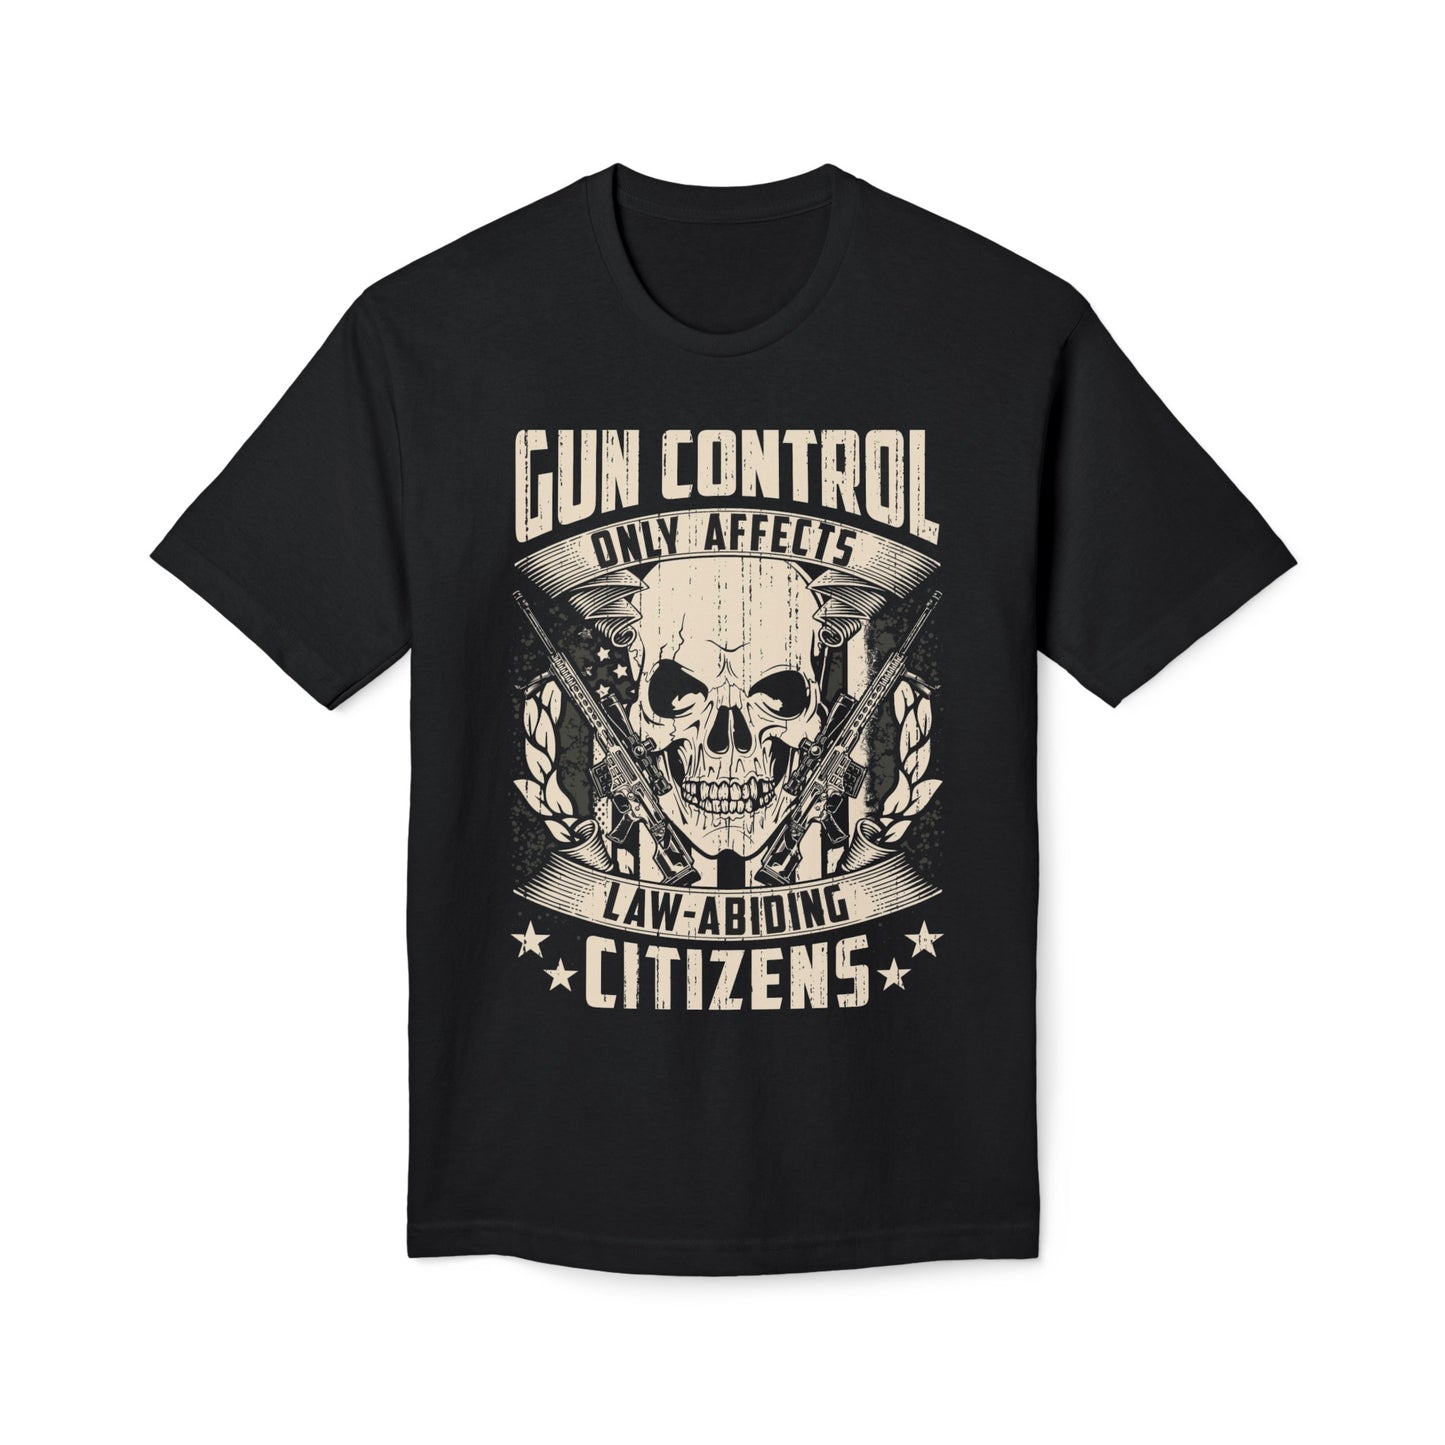 Gun Control Only Affects Law Abiding Citizens